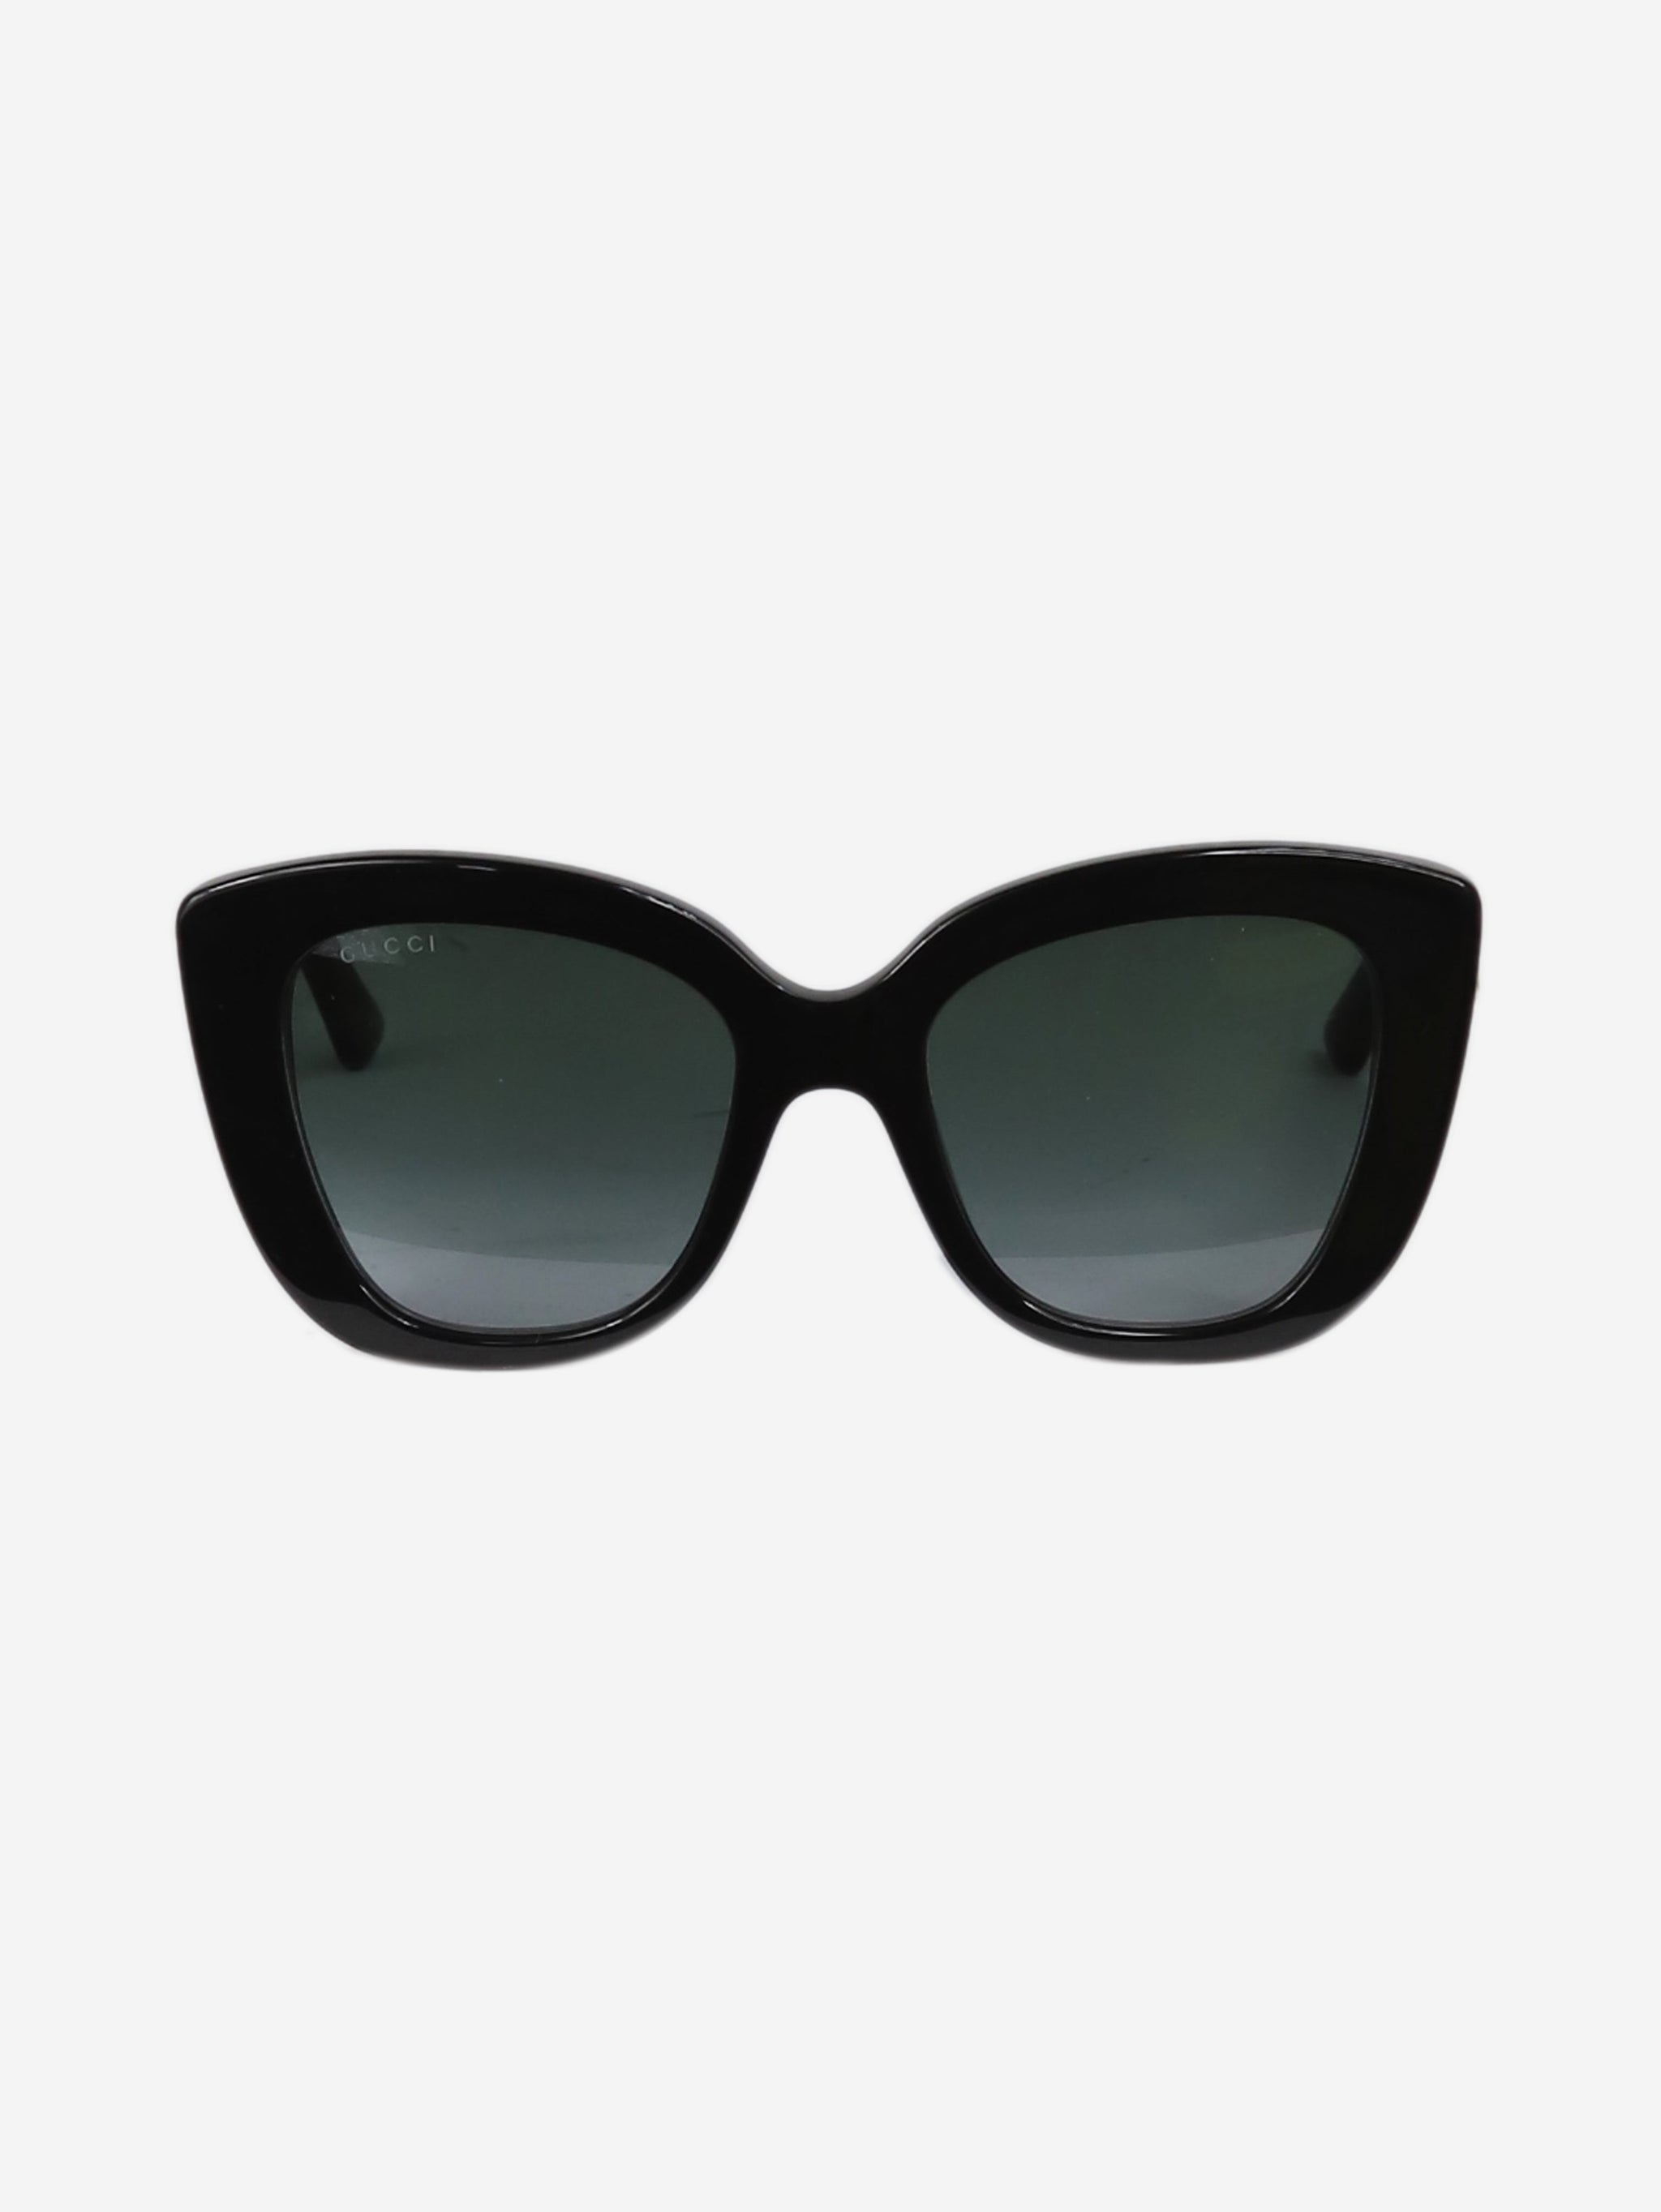 Gucci Black GG emblem oversized frame sunglasses - size | Sign of the Times